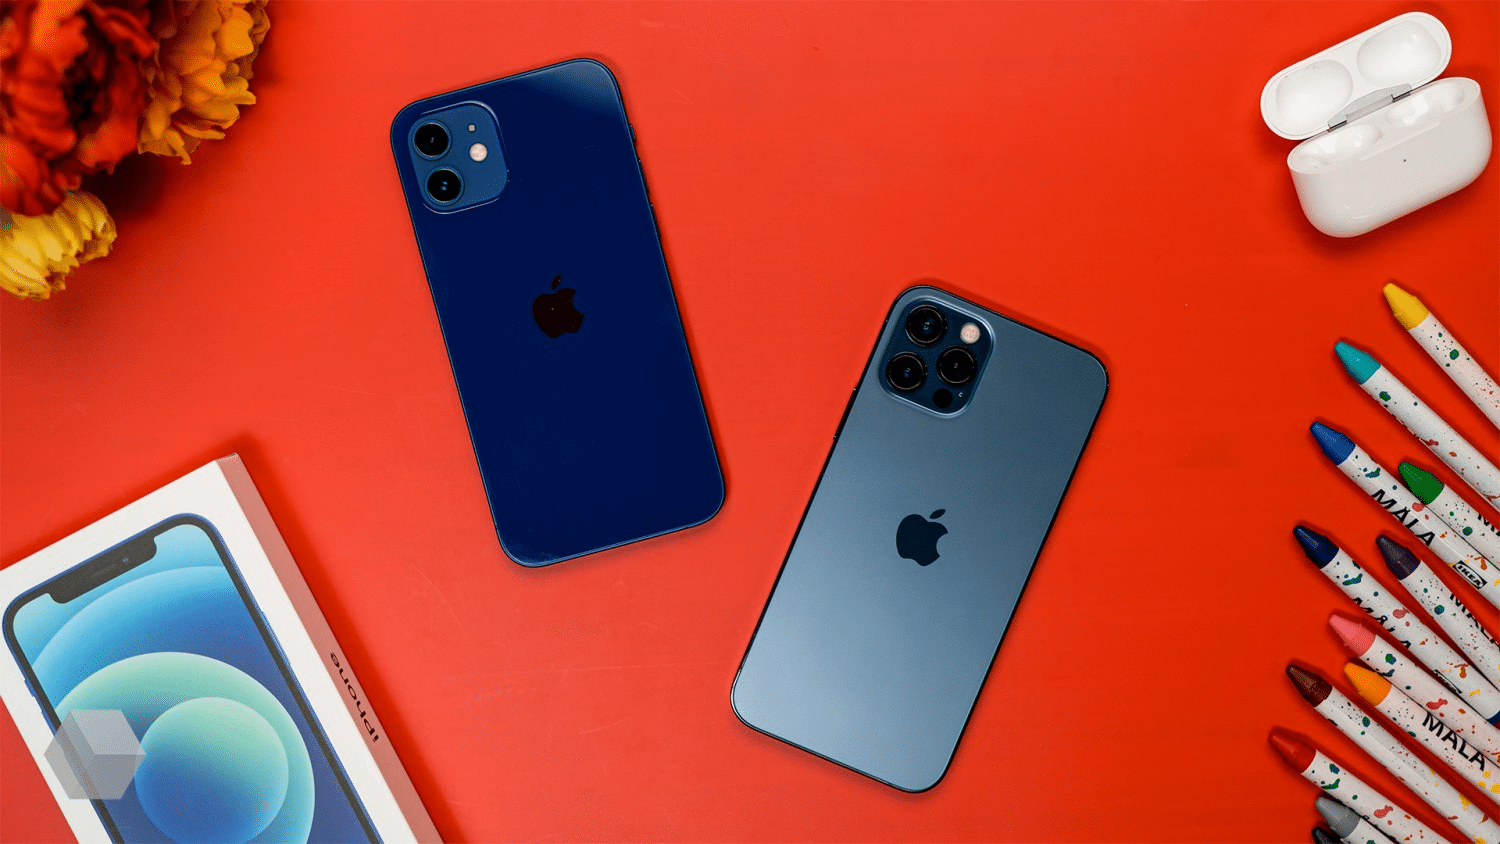 How To Share Battery On Iphone 11 To Iphone 12